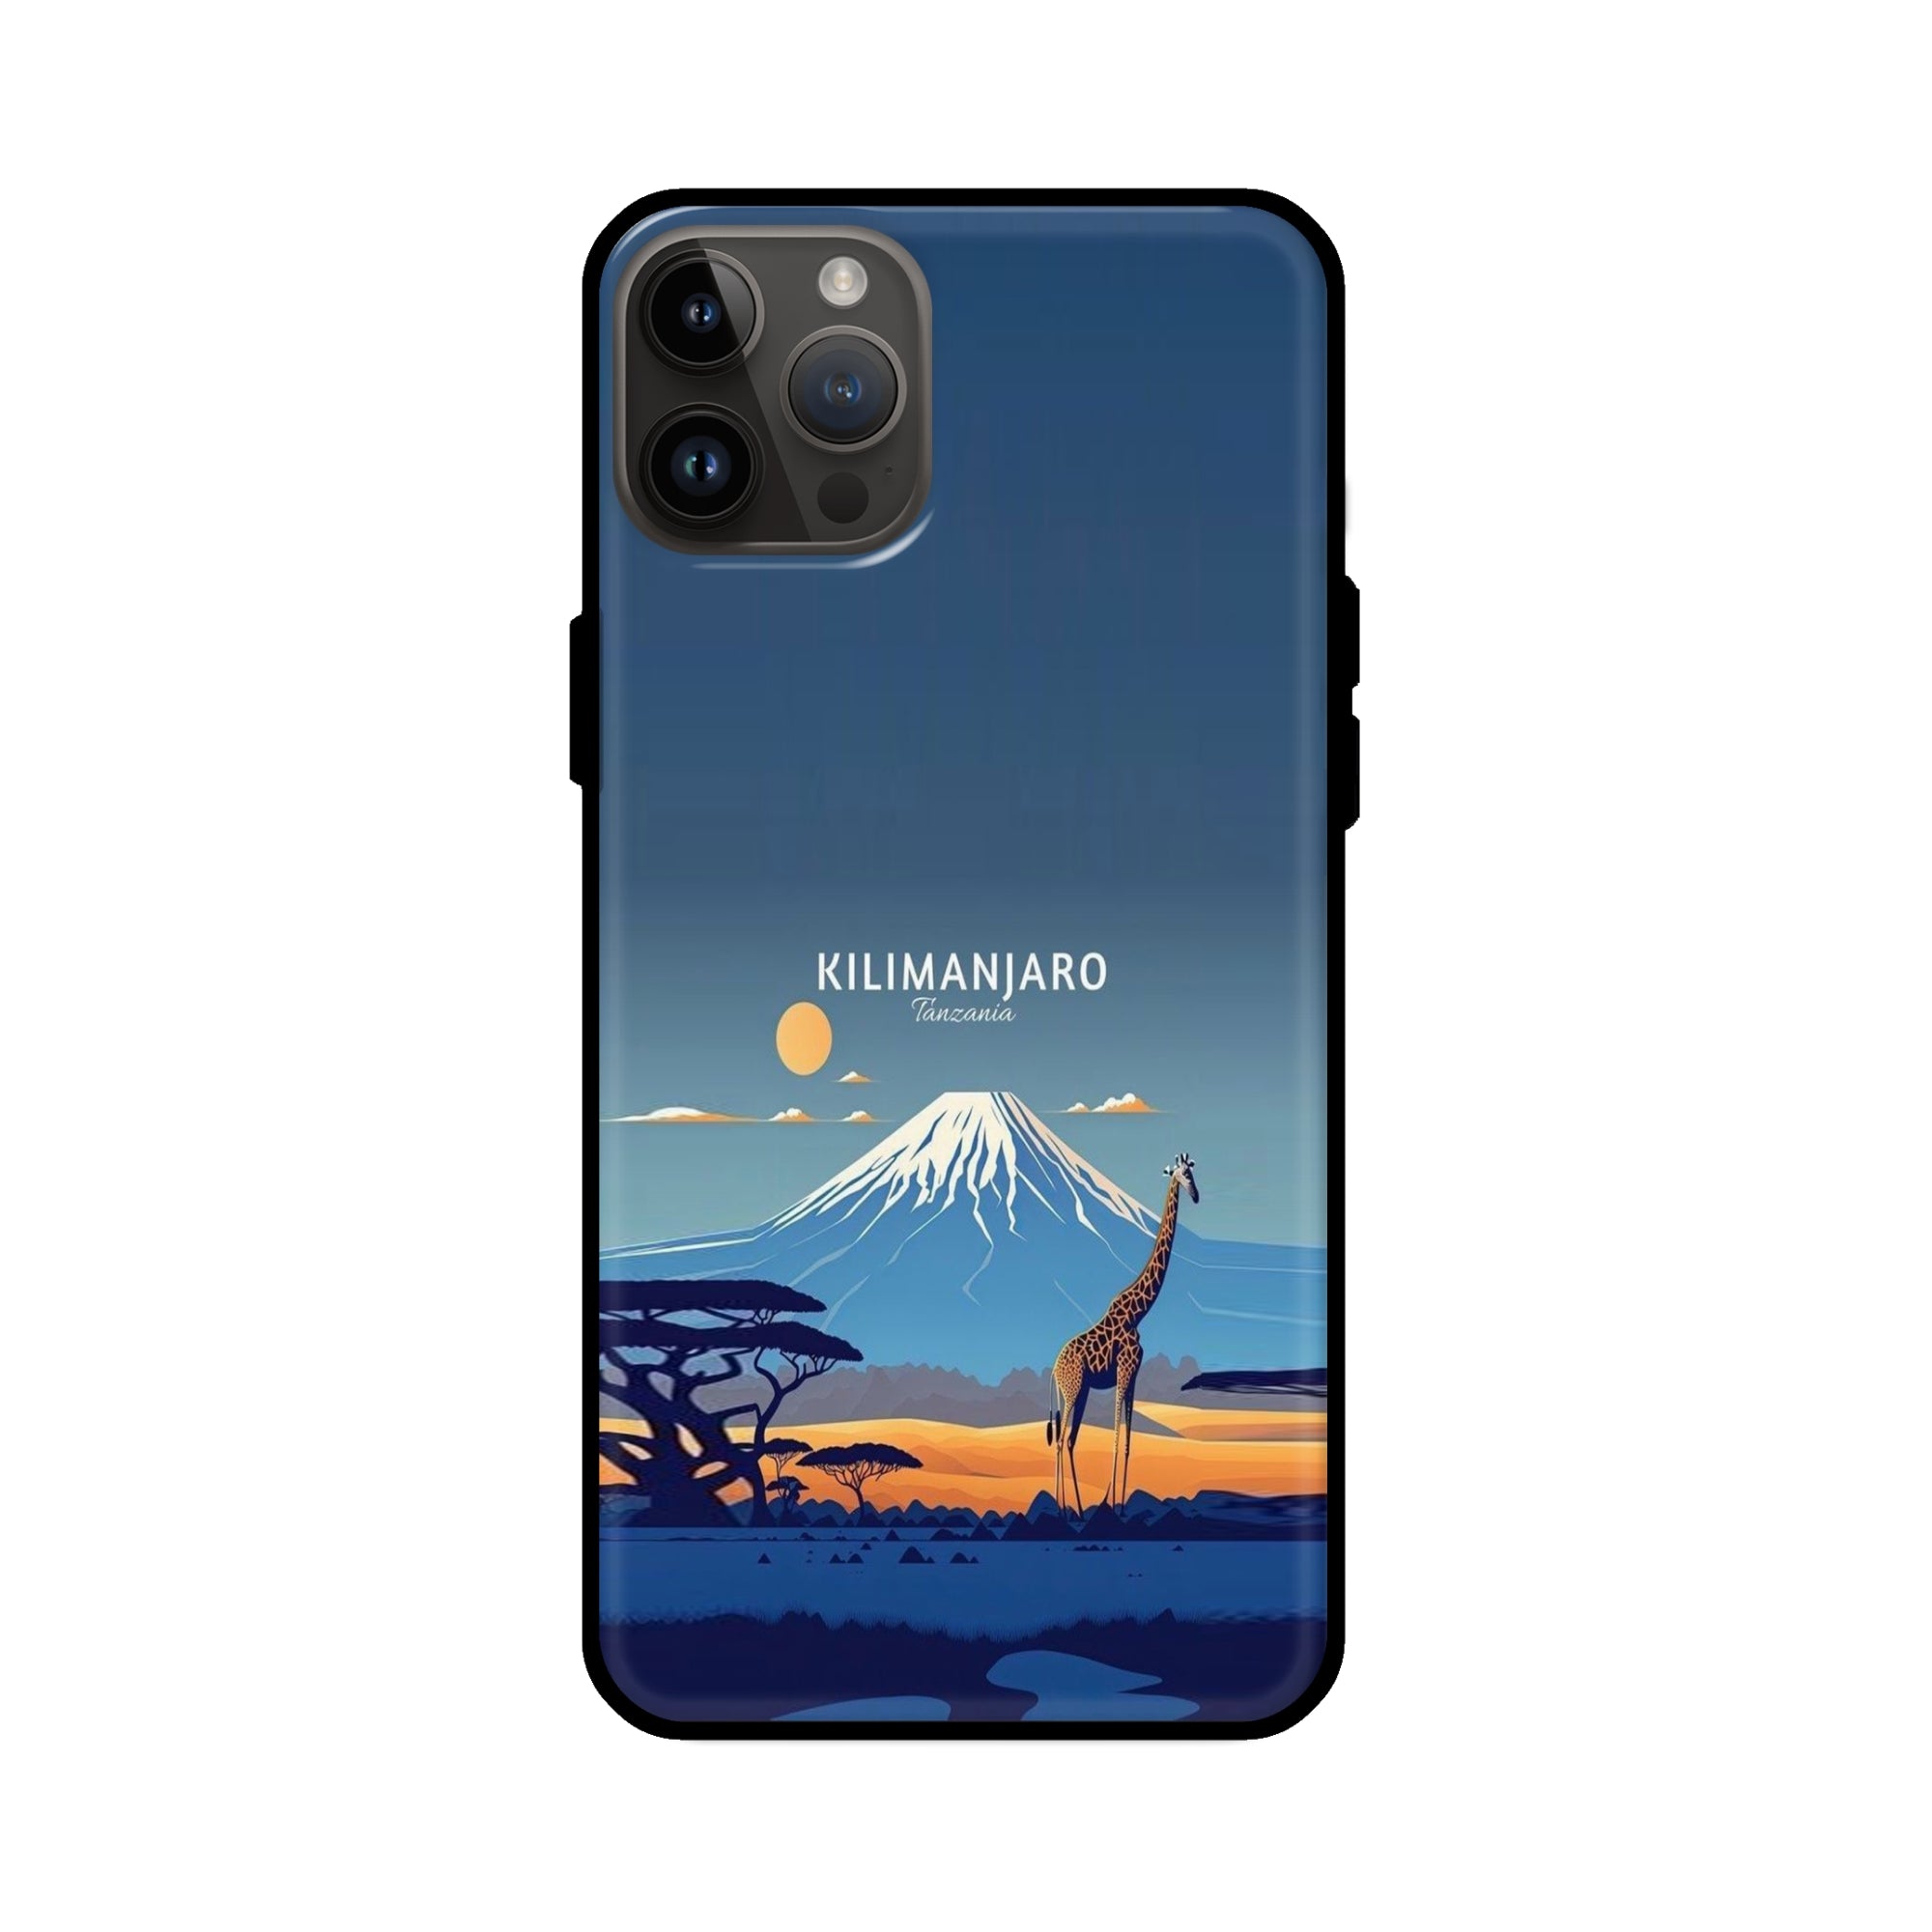 Buy Kilimanjaro Glass/Metal Back Mobile Phone Case/Cover For iPhone 14 Pro Max Online